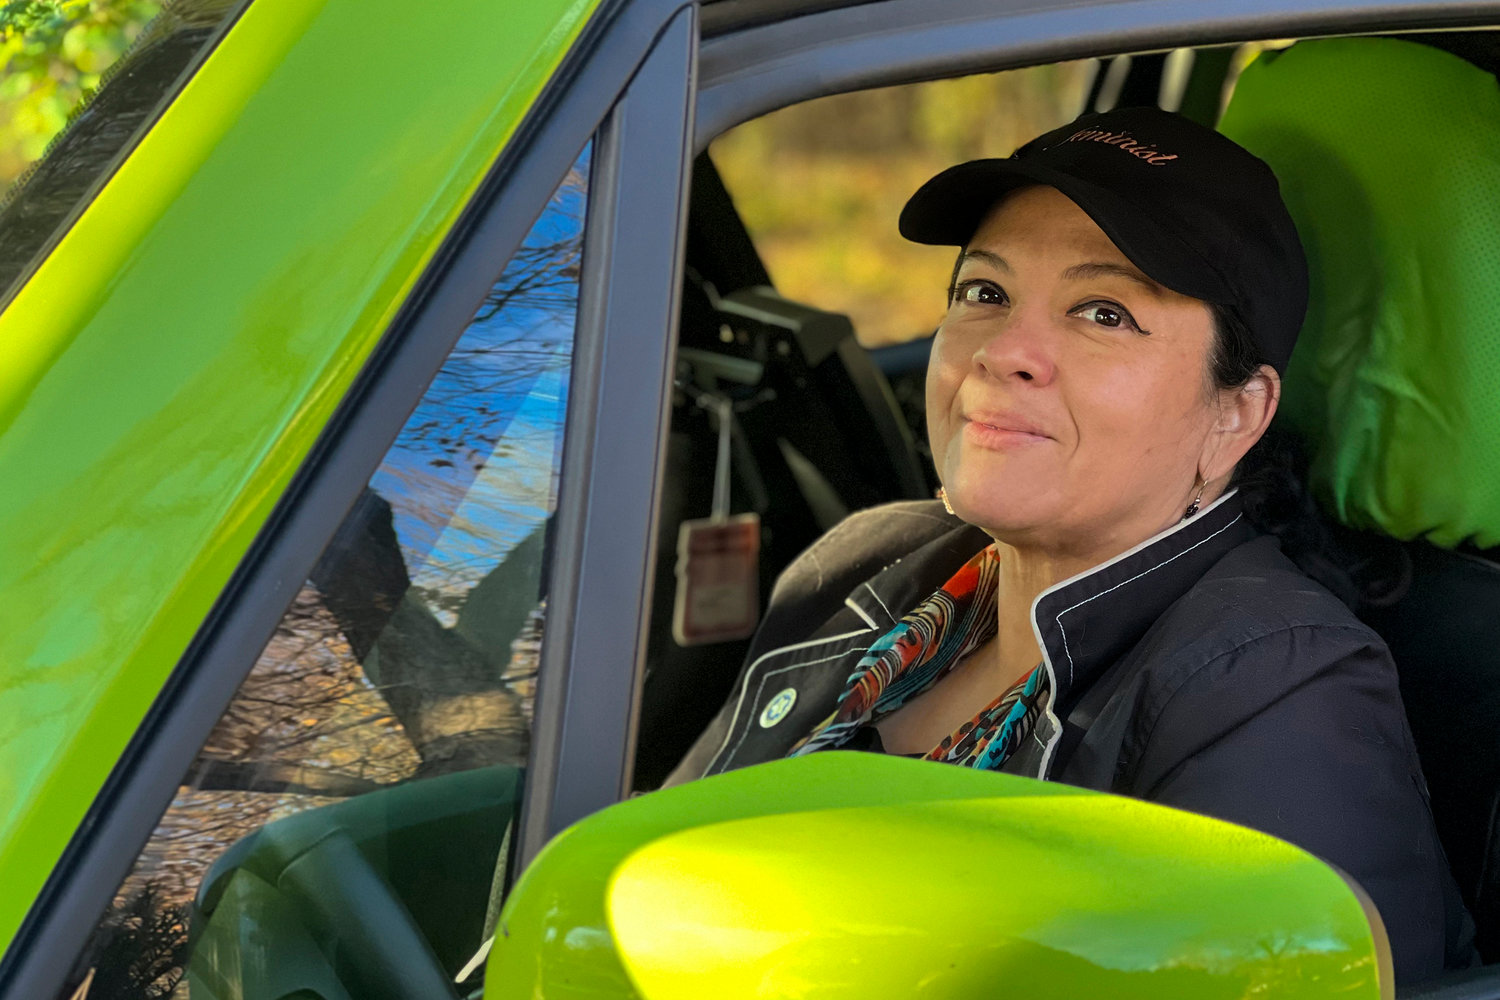 Even when the going got tough, taxi drivers got back behind their wheels during the coronavirus pandemic to deliver emergency meals. Bronx-born green cabbie Nancy Reynoso points to what appears to be an exodus of drivers like her to ride-hail companies like Uber and Lyft.